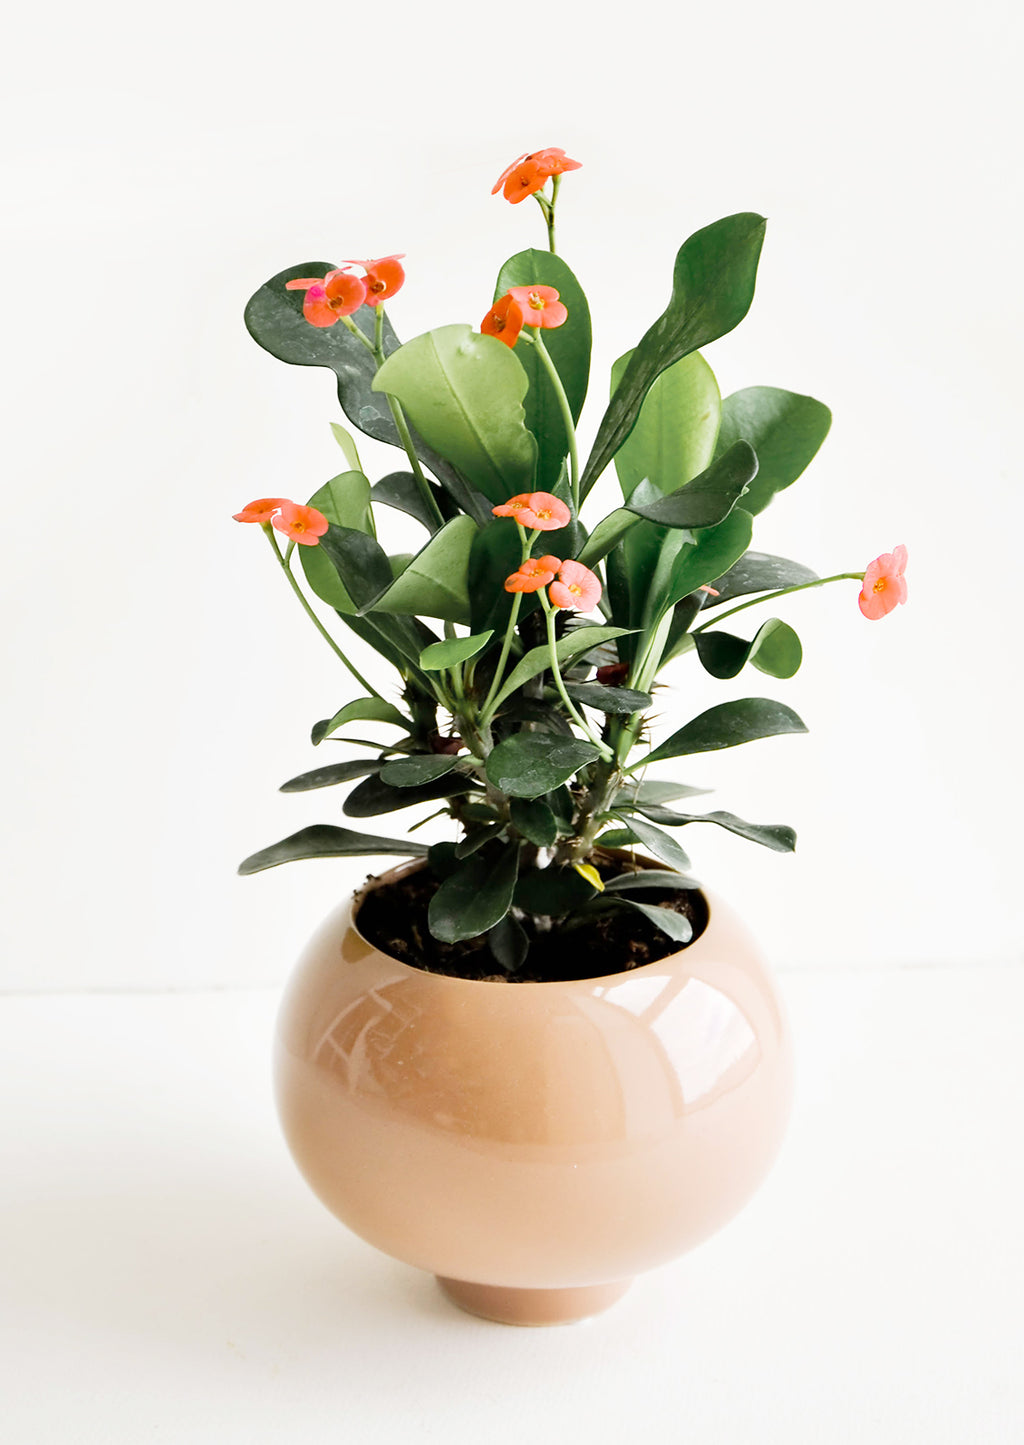 2: A glossy brown ceramic planter with a "queen of thorns" plant.